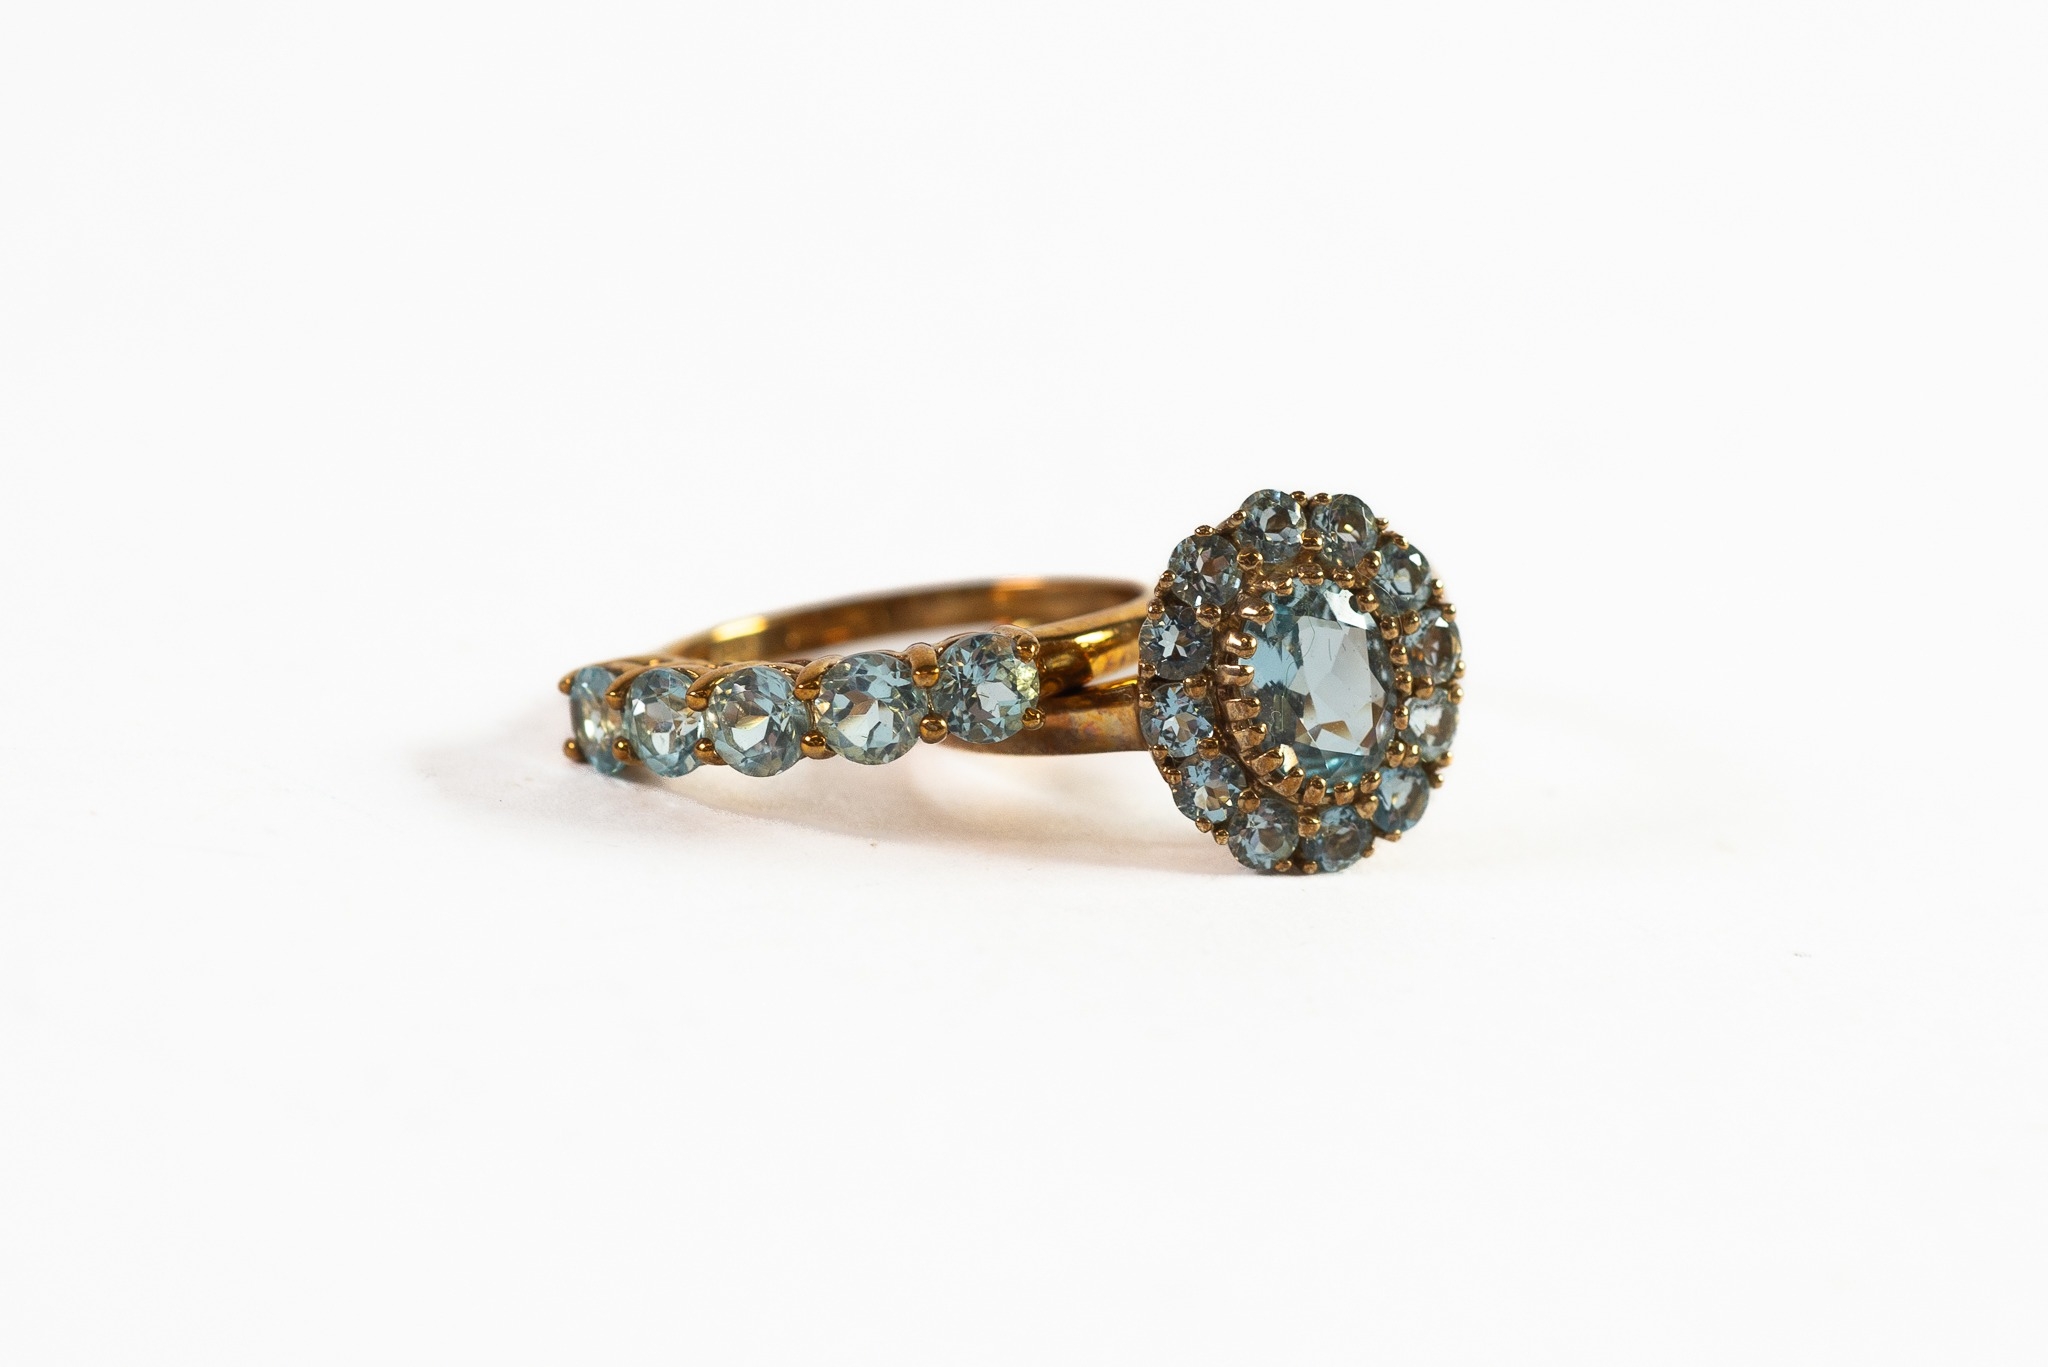 9ct GOLD OVAL CLUSTER RING set with centre oval pale blue stone and surround of small pale blue